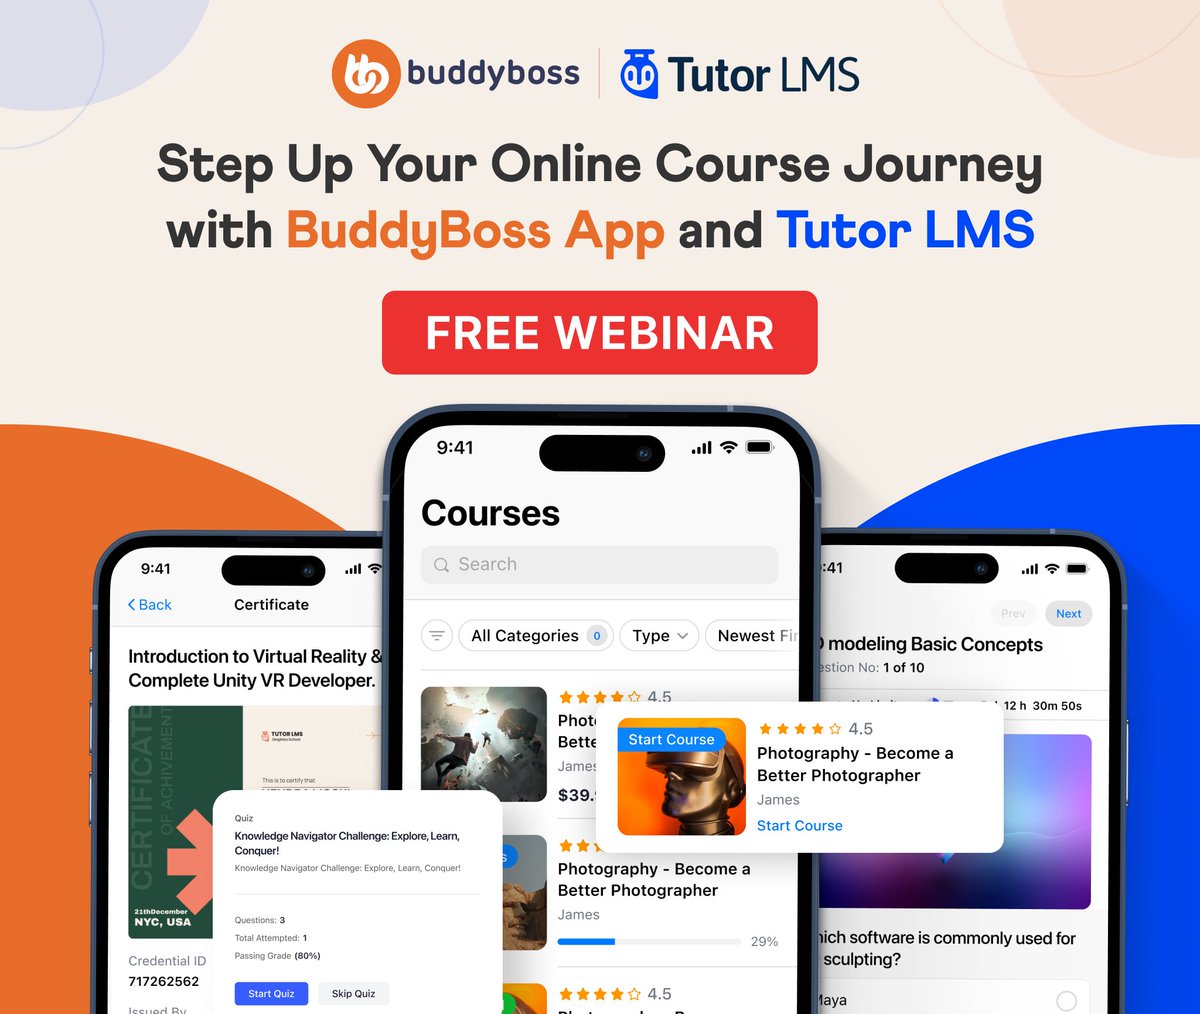 ⌛Only a day left to sign up for the FREE Webinar It’s time to step up your online courses with our webinar. Learn everything from boosting engagement to launching your mobile app with BuddyBoss and Tutor LMS. Register now 👉 buddyboss.com/tutorlms-app/ #BuddyBoss #TutorLMS